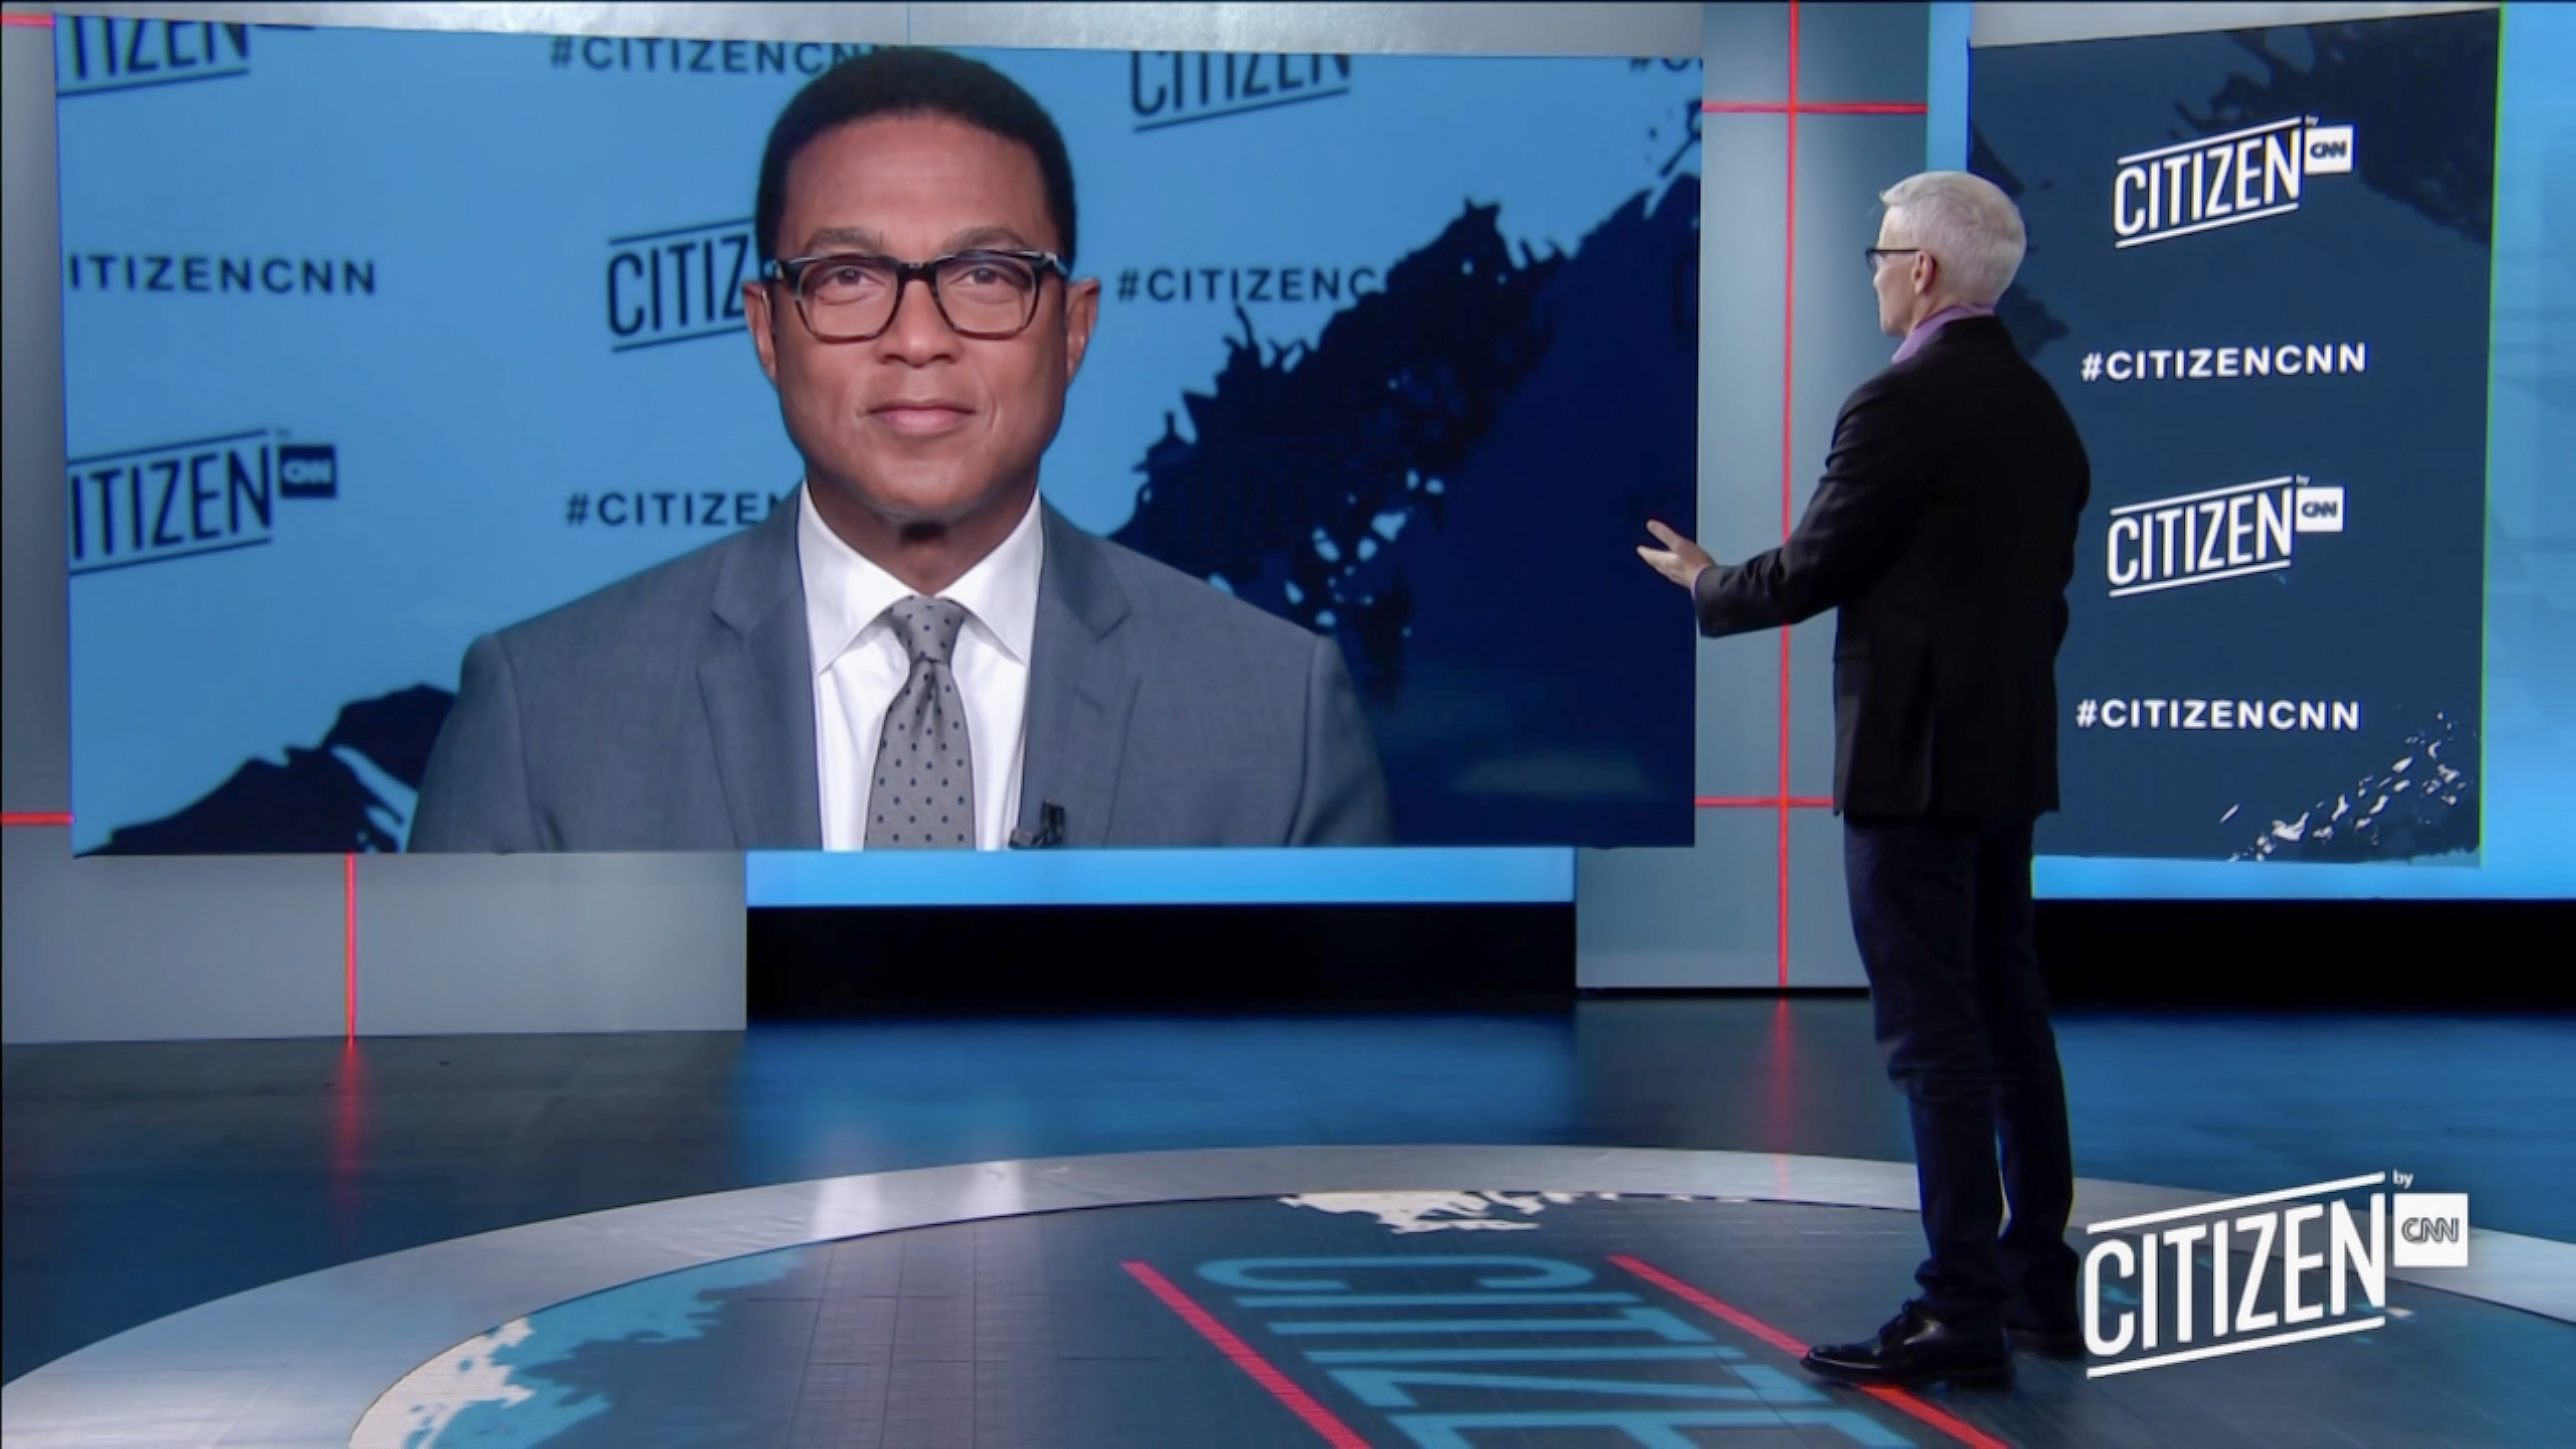 Anderson Cooper stands in the CNN studio speaking with Don Lemon, who appears on a large screen.